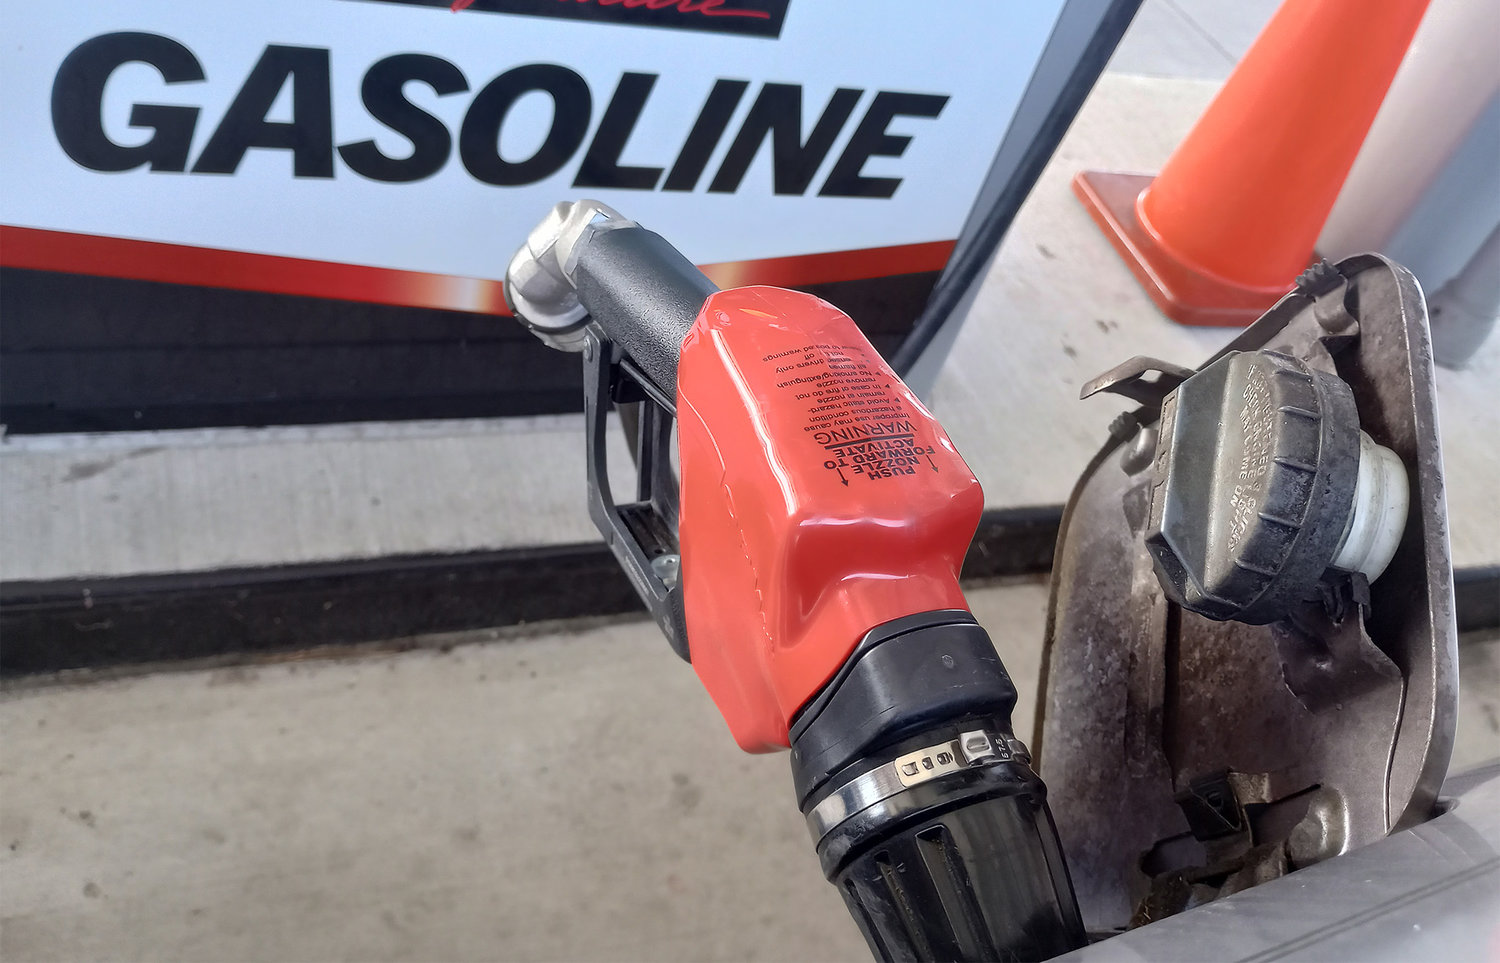 A motorist fills his tank at a Costco gas station in Dallas, Ga., Nov. 4, 2022. (Christian Index/Henry Durand)